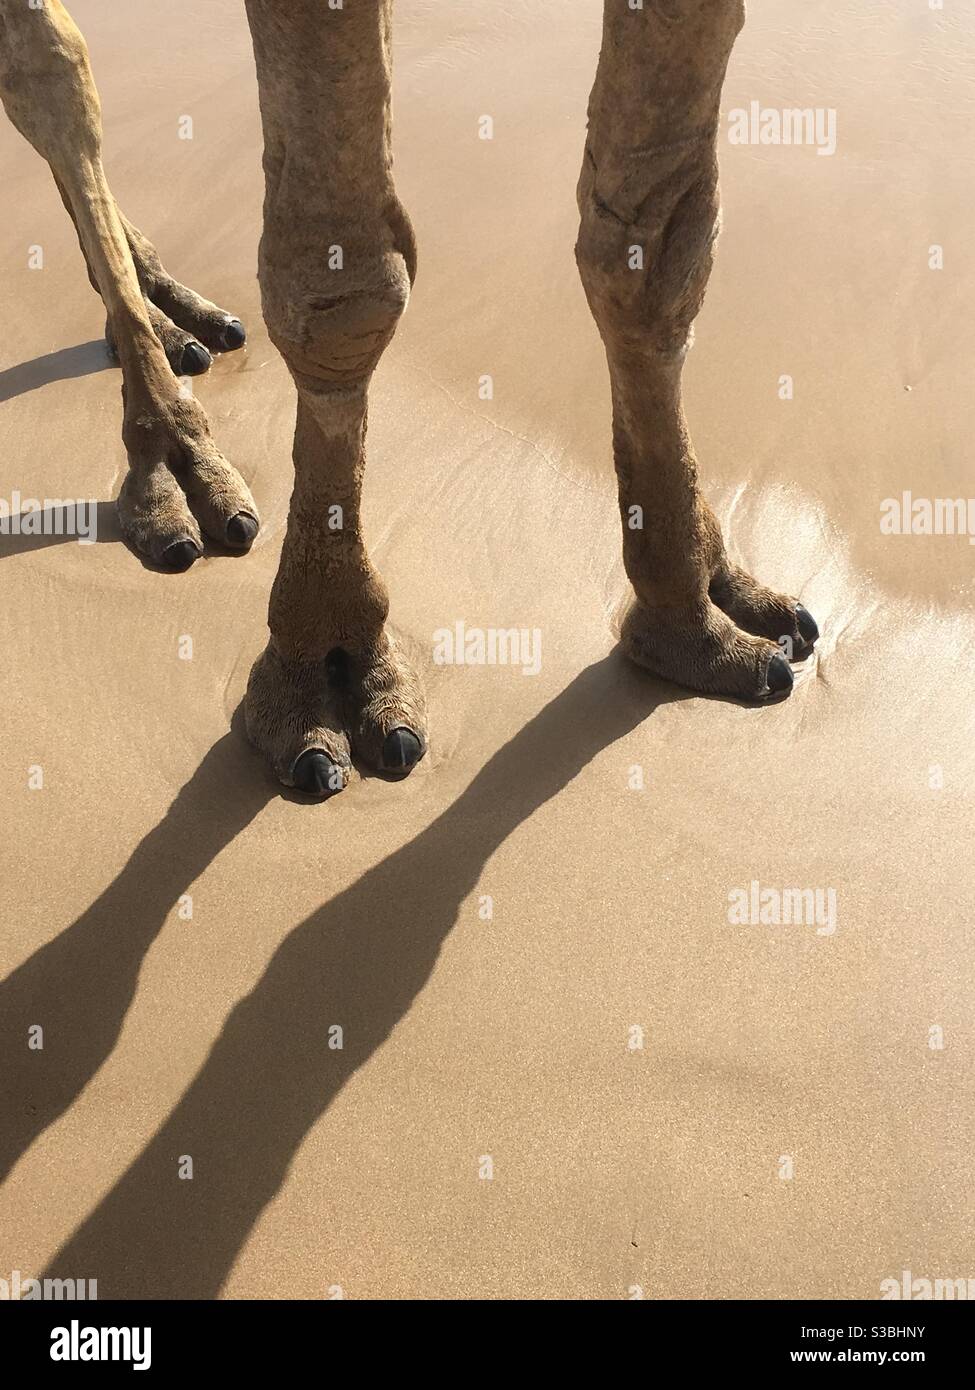 Cameltoes in the sand Stock Photo - Alamy